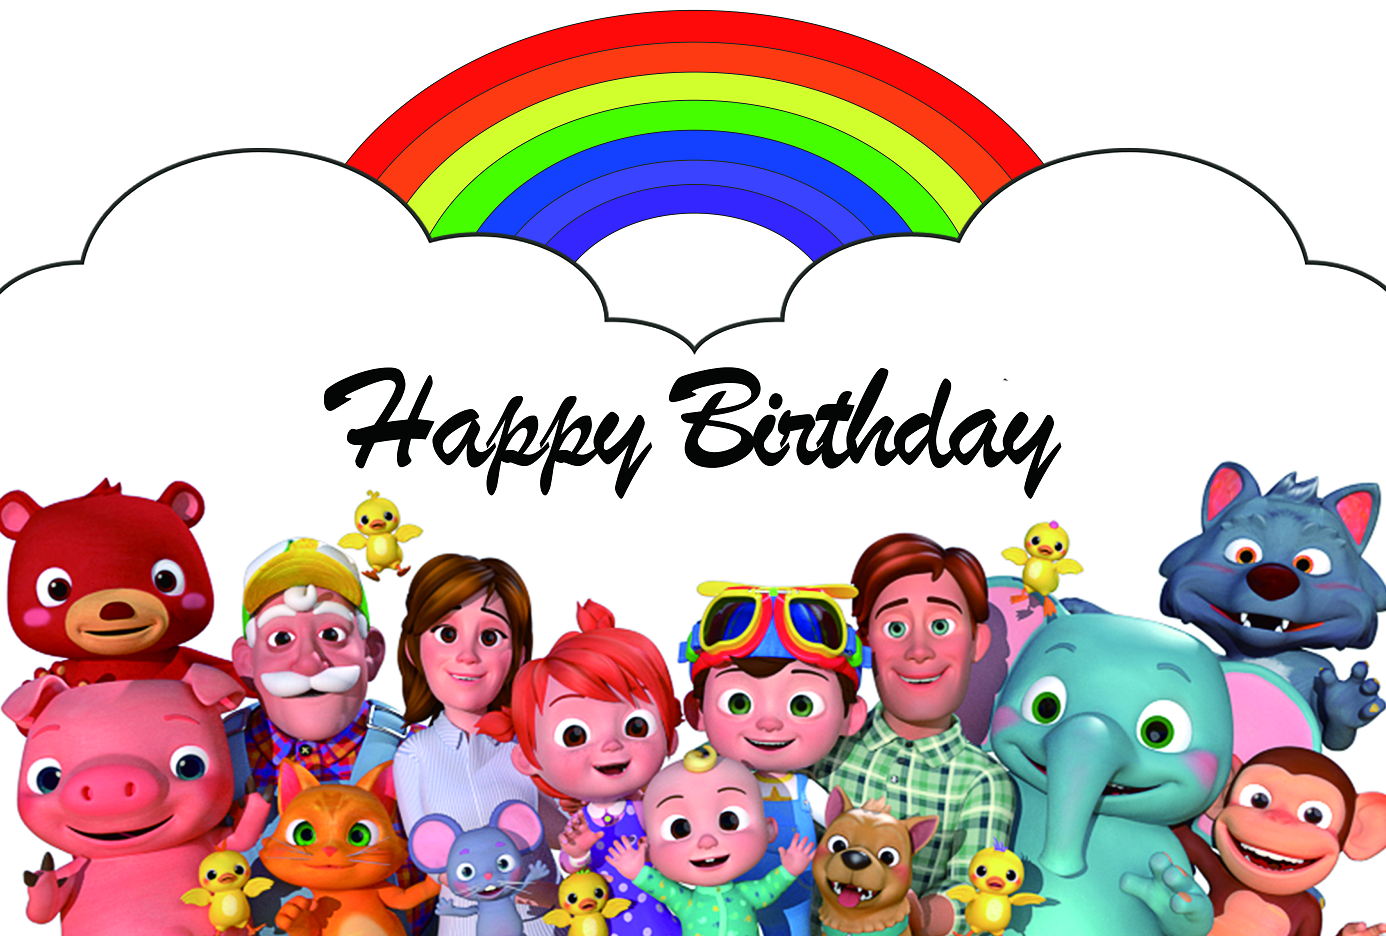 See more ideas about birthday party, birthday, 1st birthday party themes. 